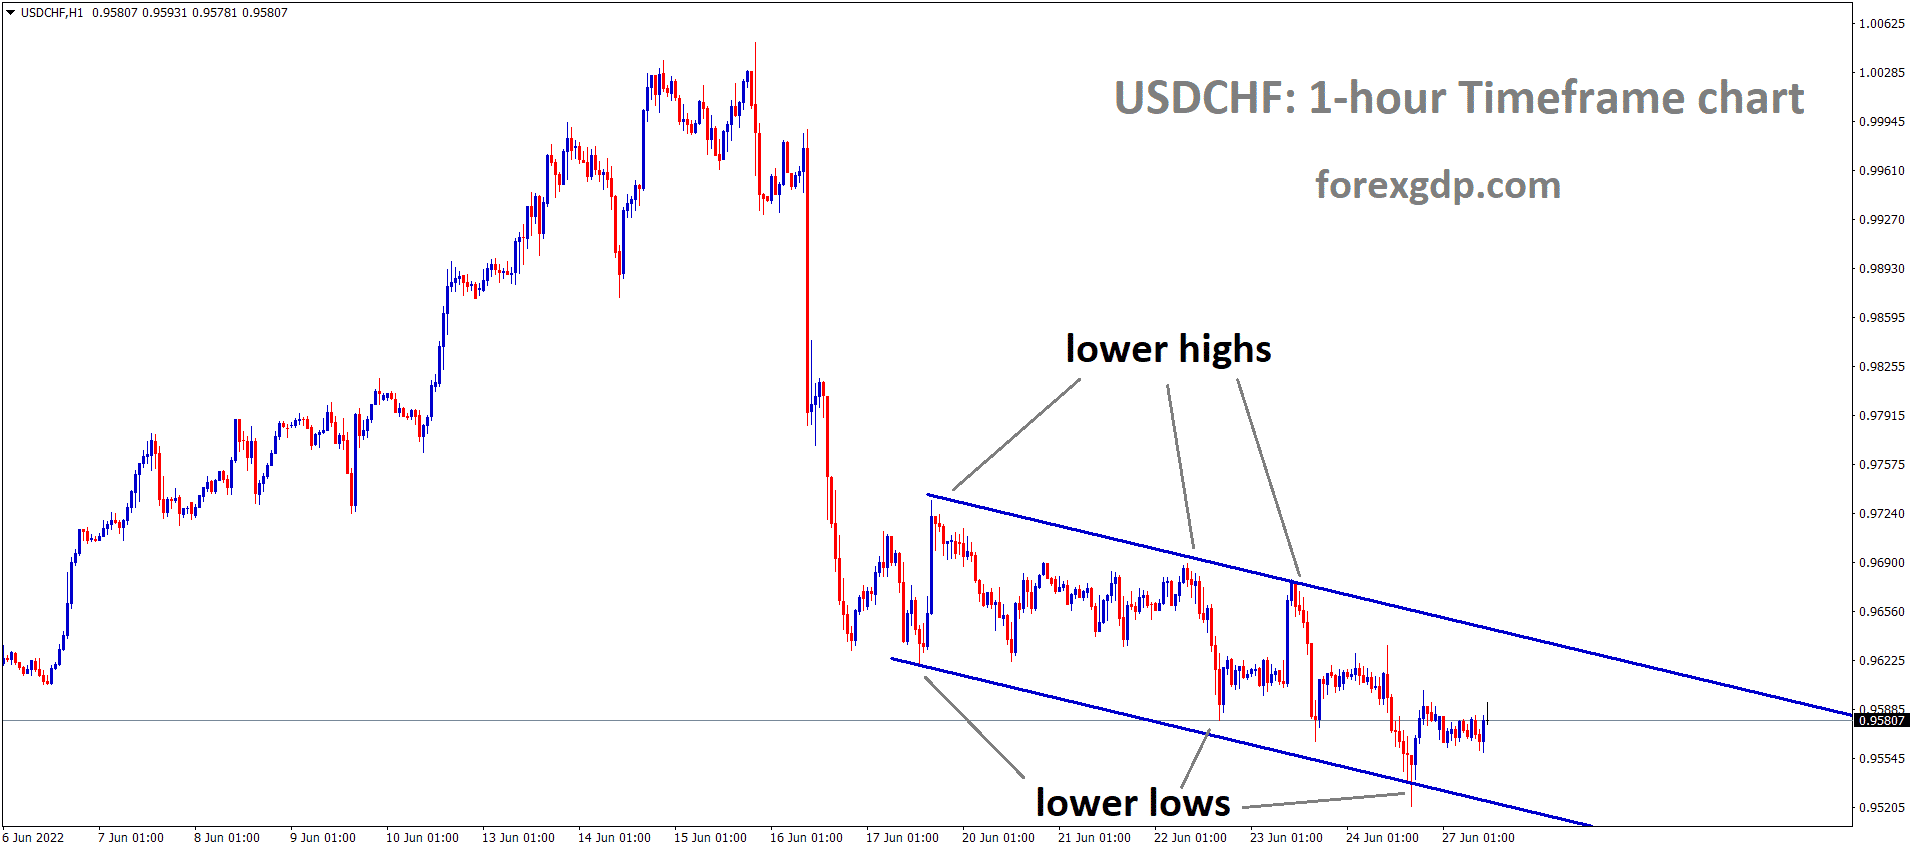 USDCHF is moving in the Descending channel and the Market has rebounded from the lower low area of the channel